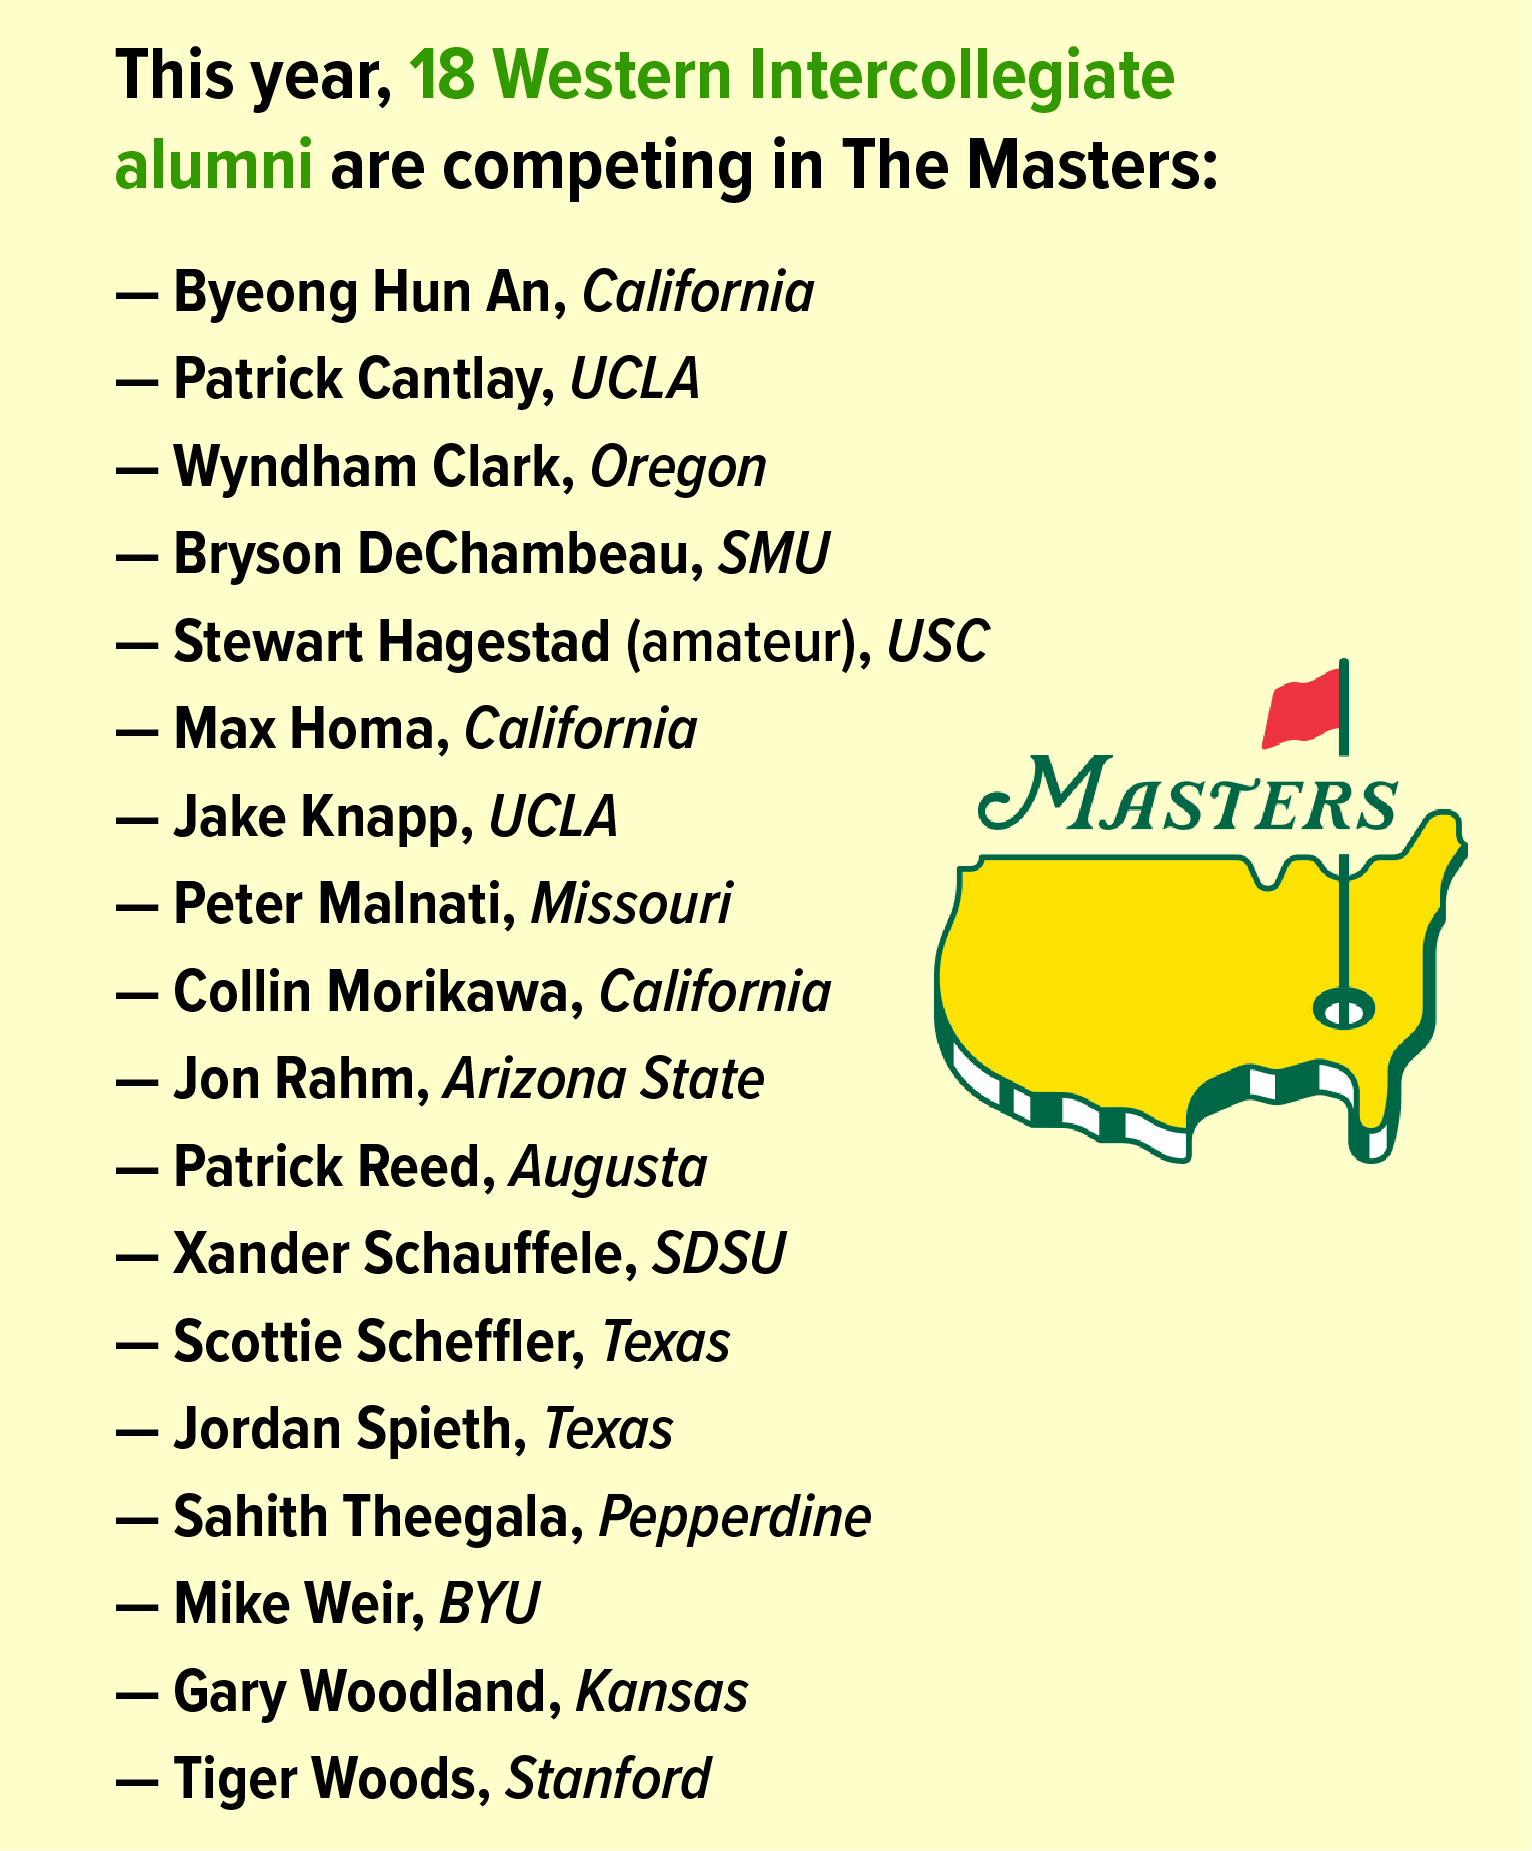 This year, 18 Western Intercollegiate alumni are competing in The Masters. (list below)